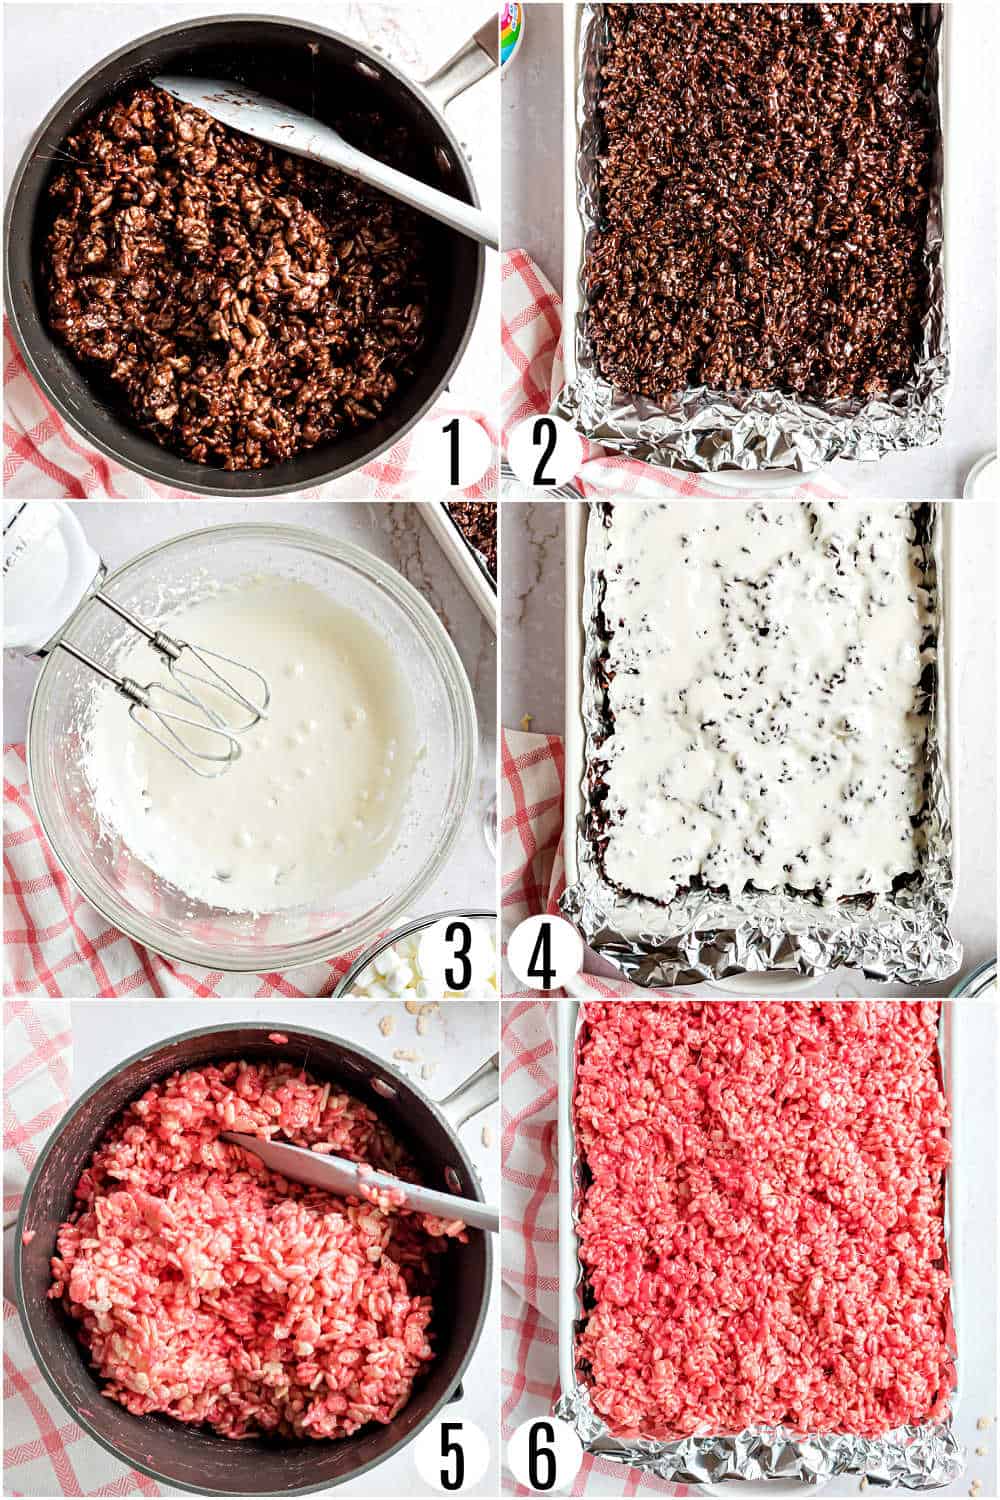 Step by step photos showing how to make triple layer rice krispie treats.